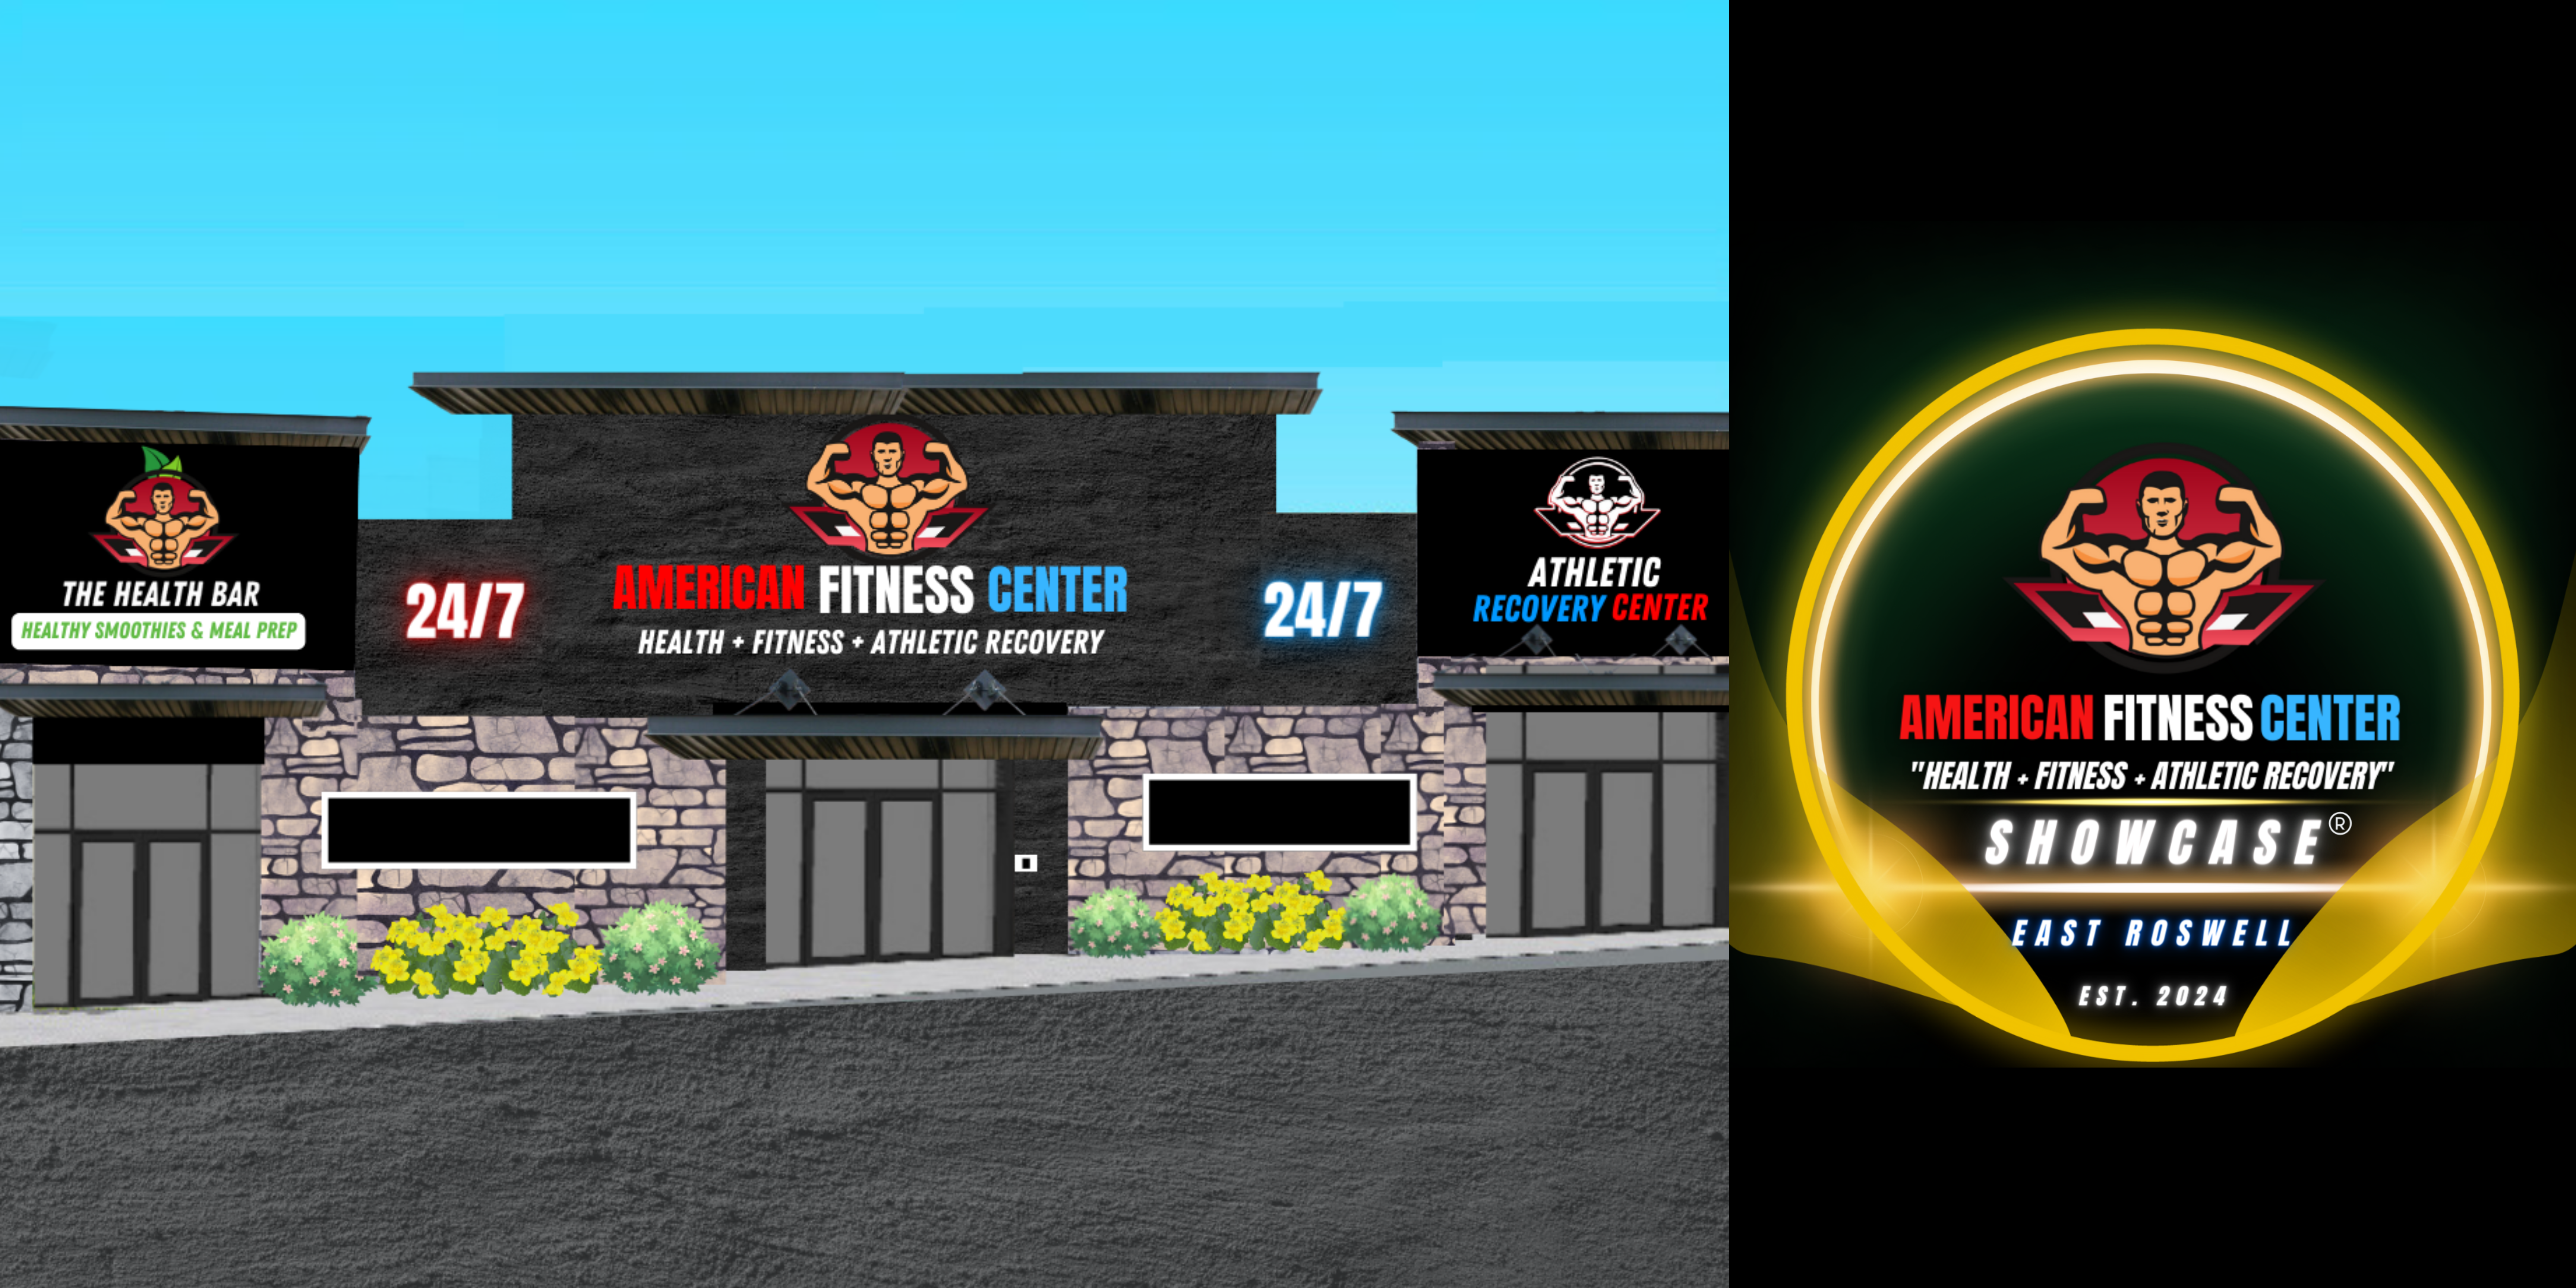 American Fitness Center East Roswell, GA - High-End 24 Hour Health Club Coming Soon